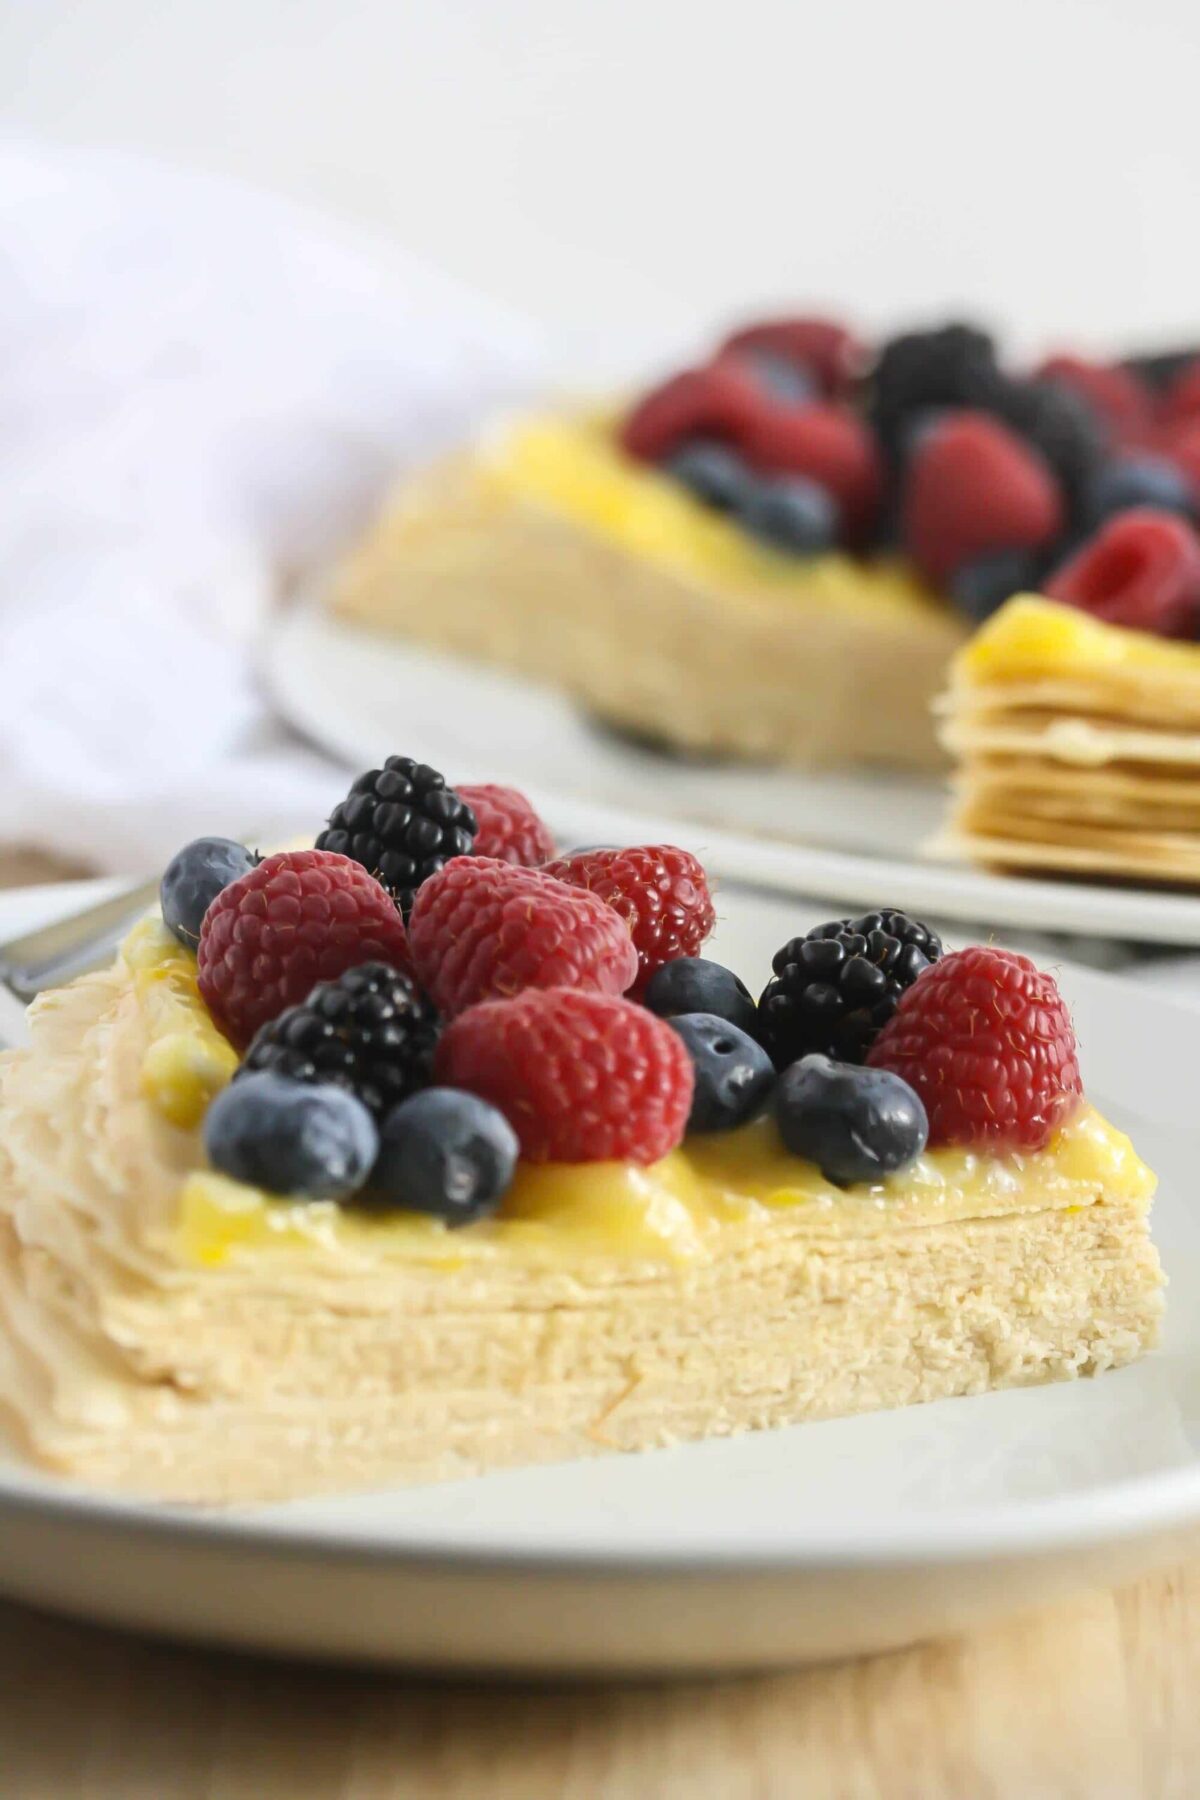 This Buttercream Crepe Cake with Lemon Curd is a decadent dessert that's lightened up and gluten-free.  And don't forget gorgeous! Each delicious crepe is layered with buttercream and topped with tangy lemon curd! 